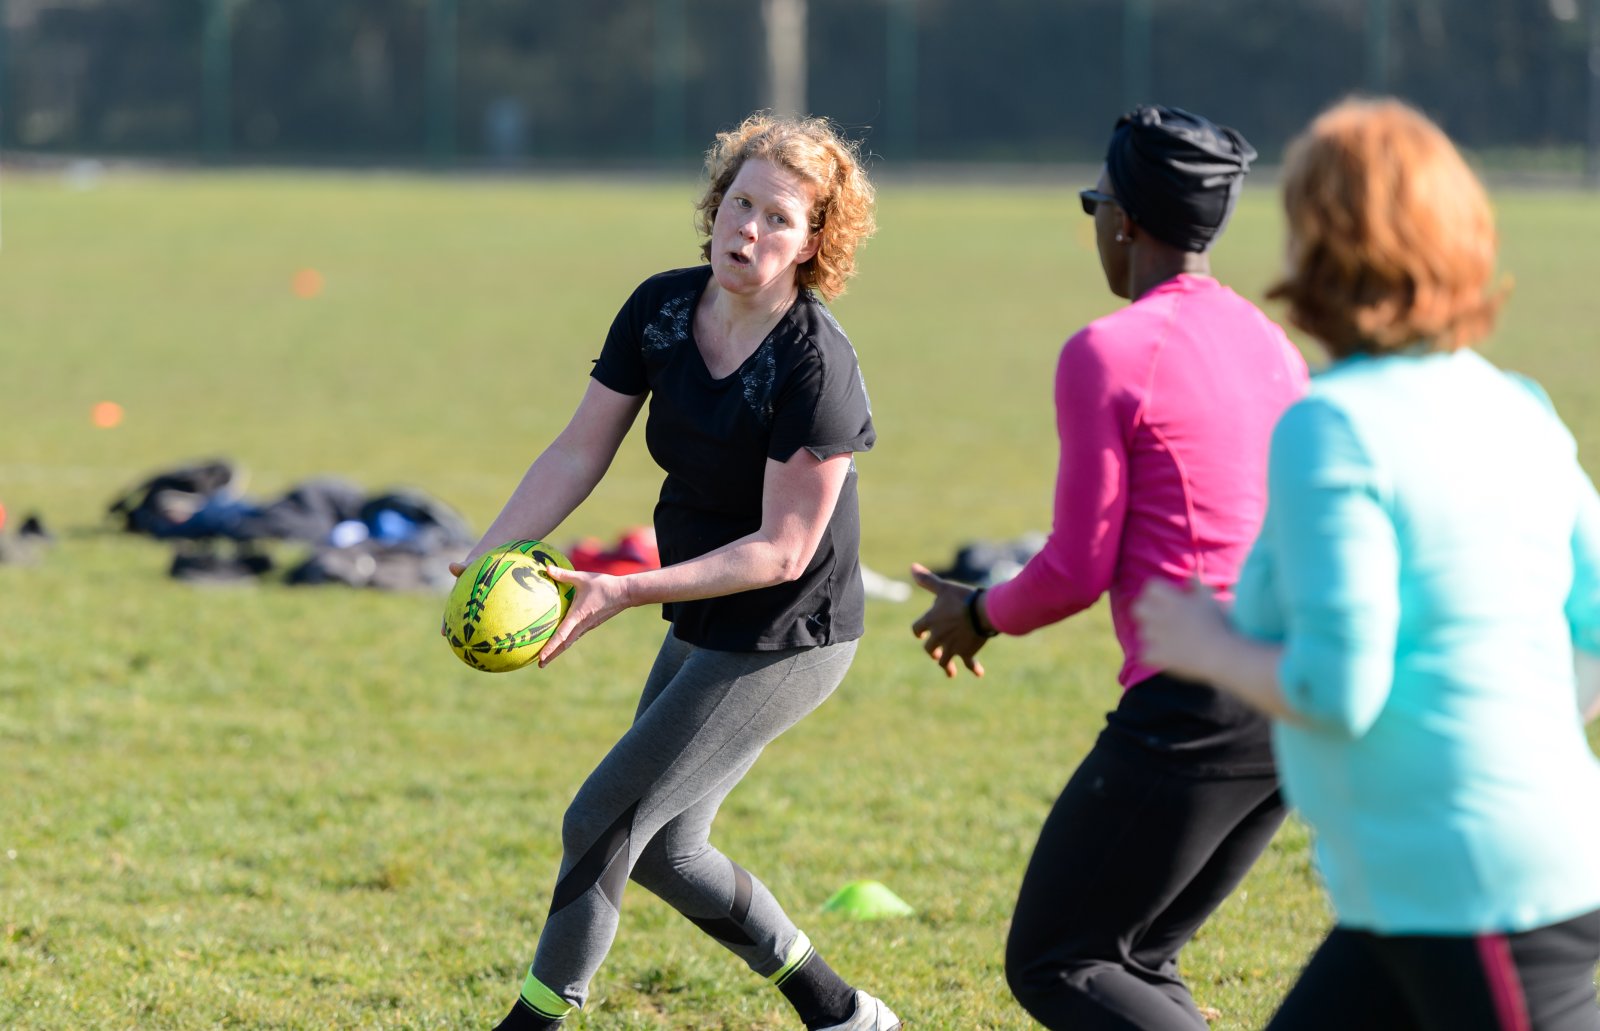 Find out more about touch rugby